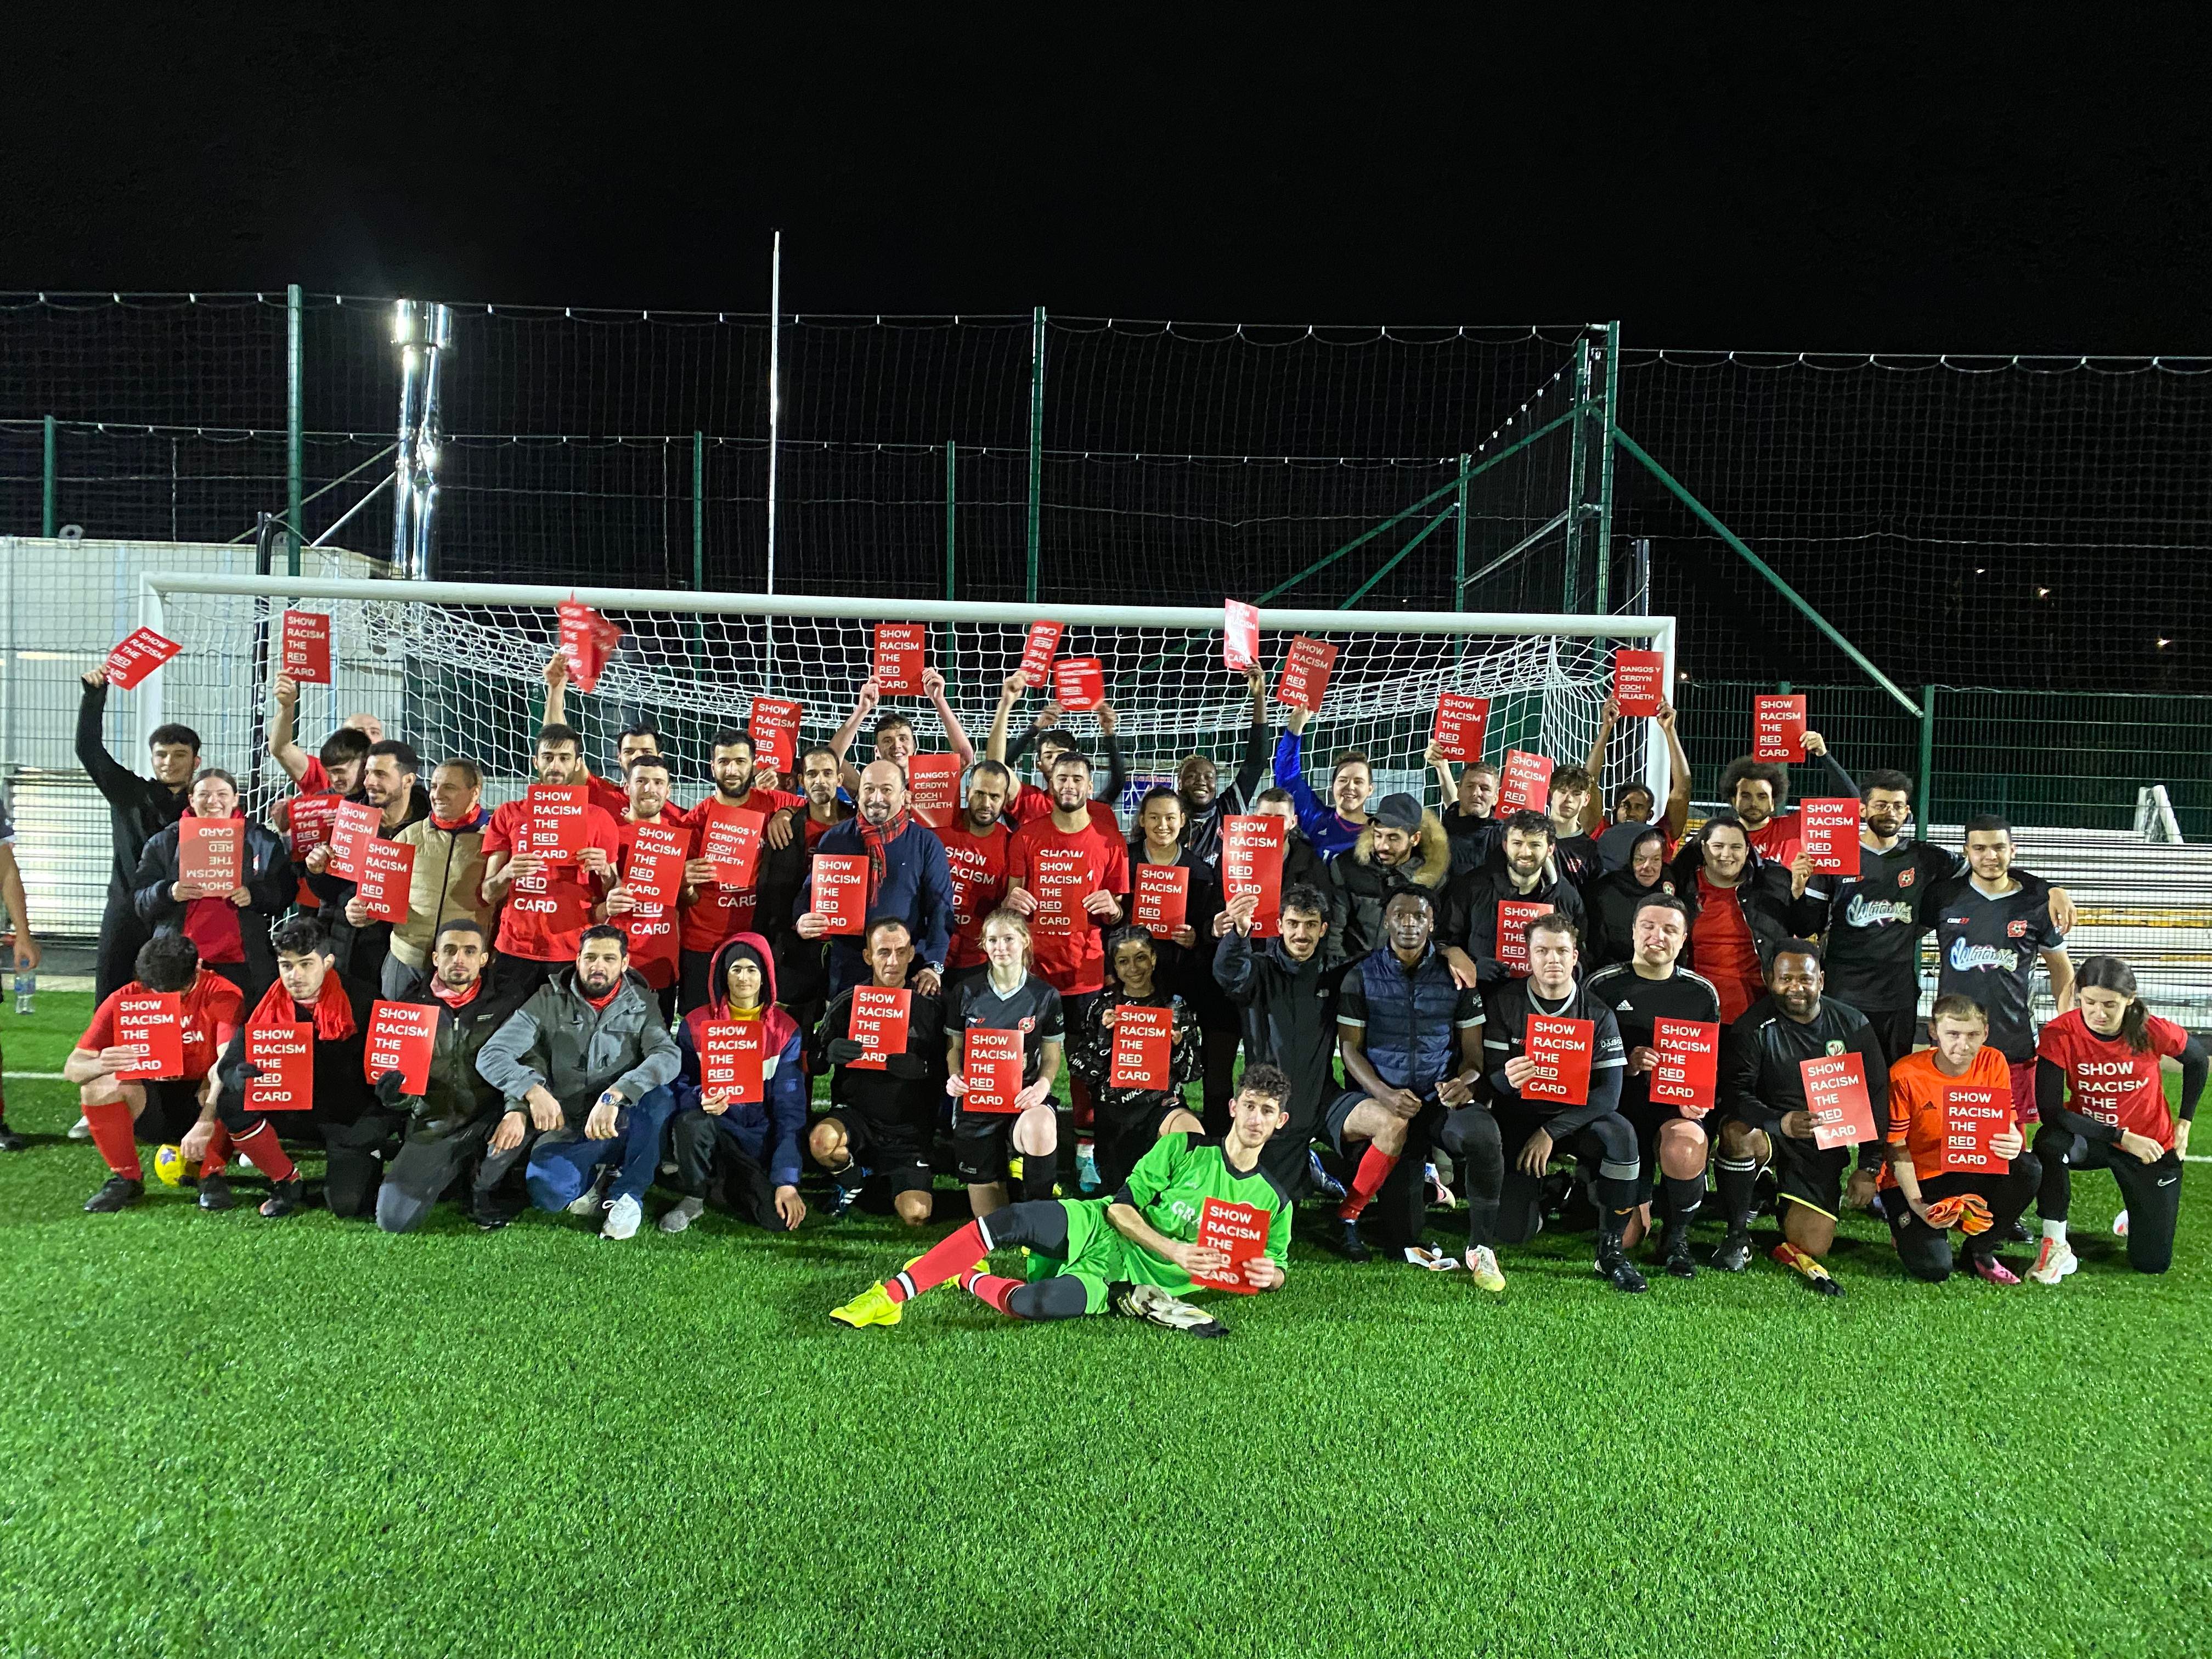 Show Racism the Red Card V Street Football Wales